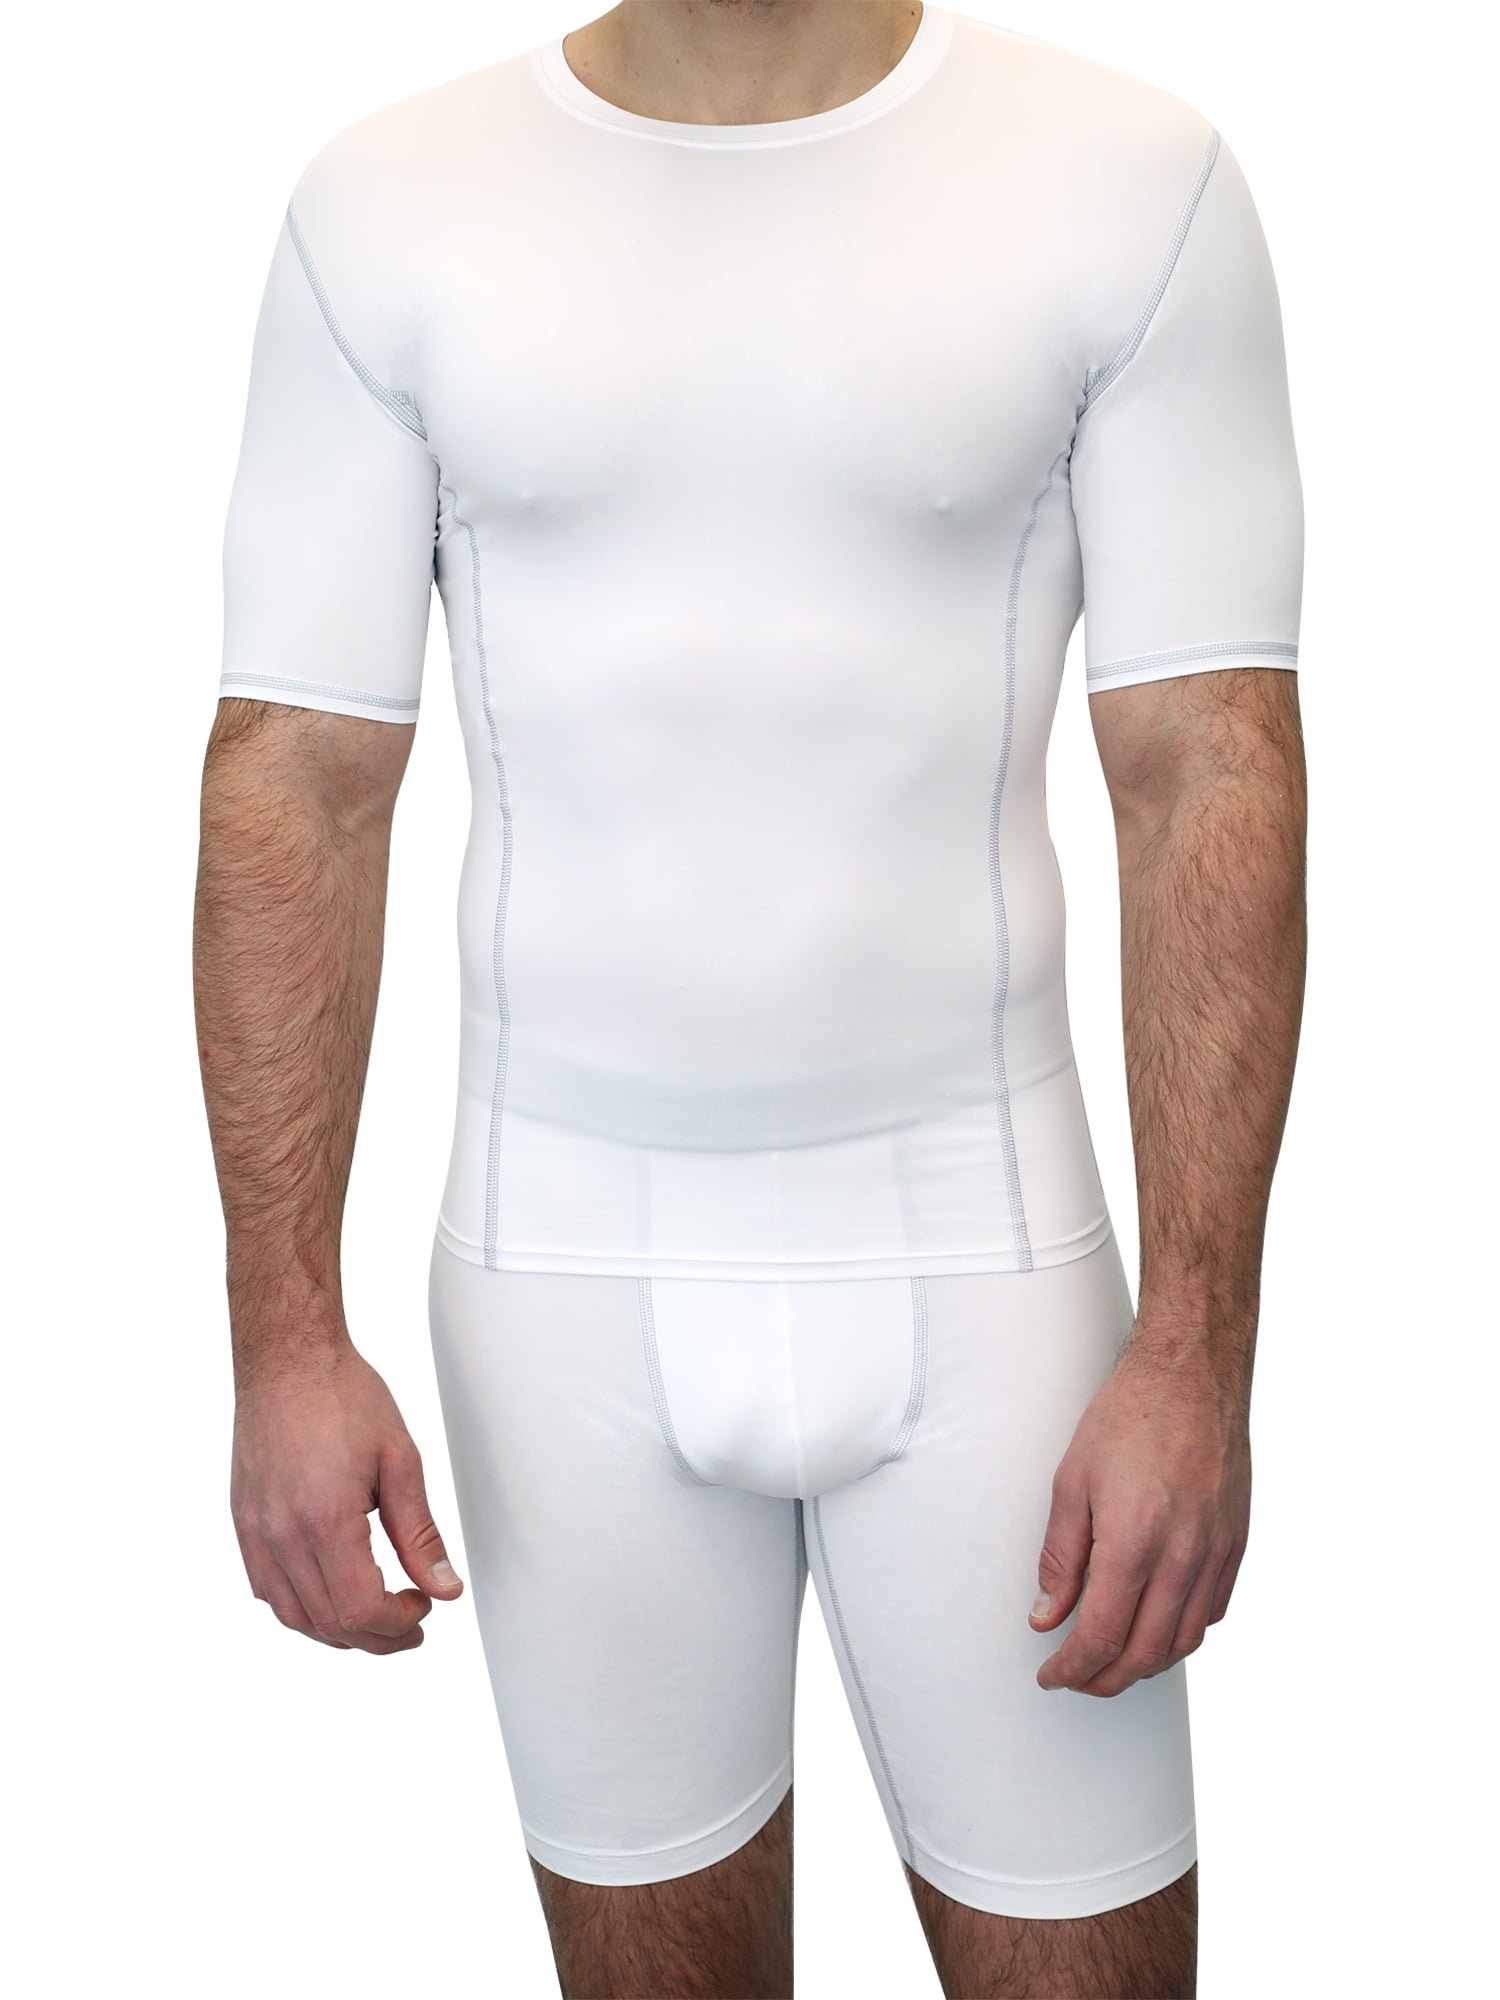 Shop Basketball Compression Shirt with great discounts and prices